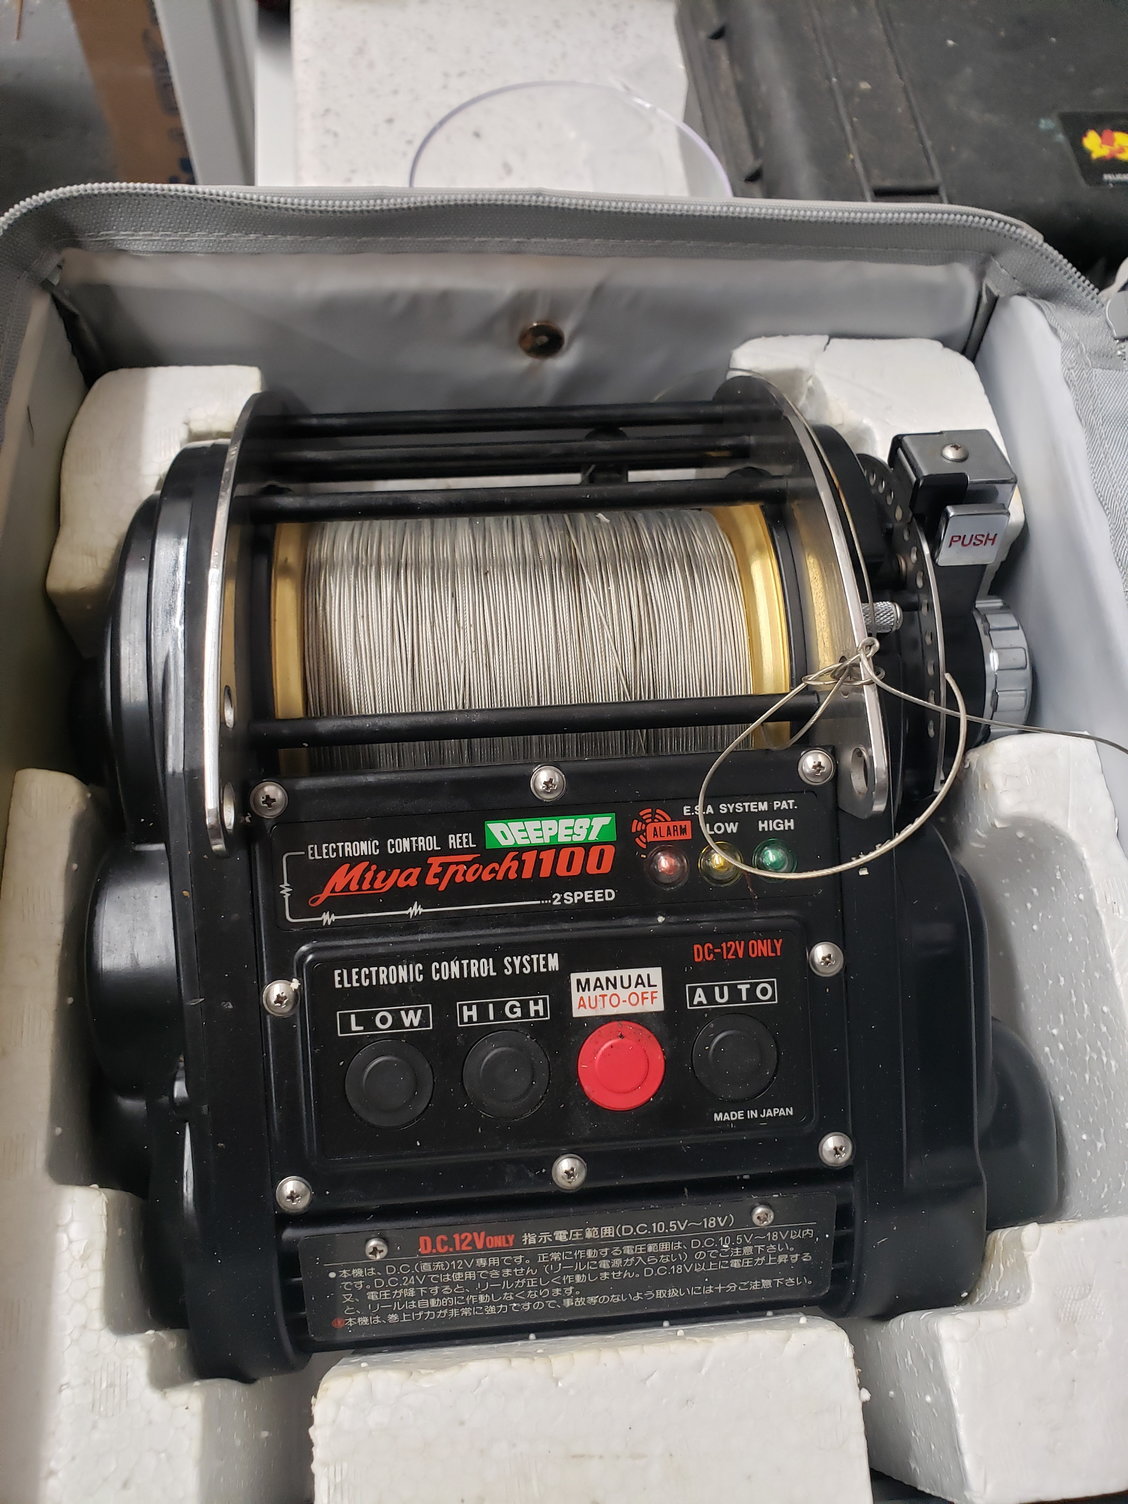 Electric Reels for sale - The Hull Truth - Boating and Fishing Forum